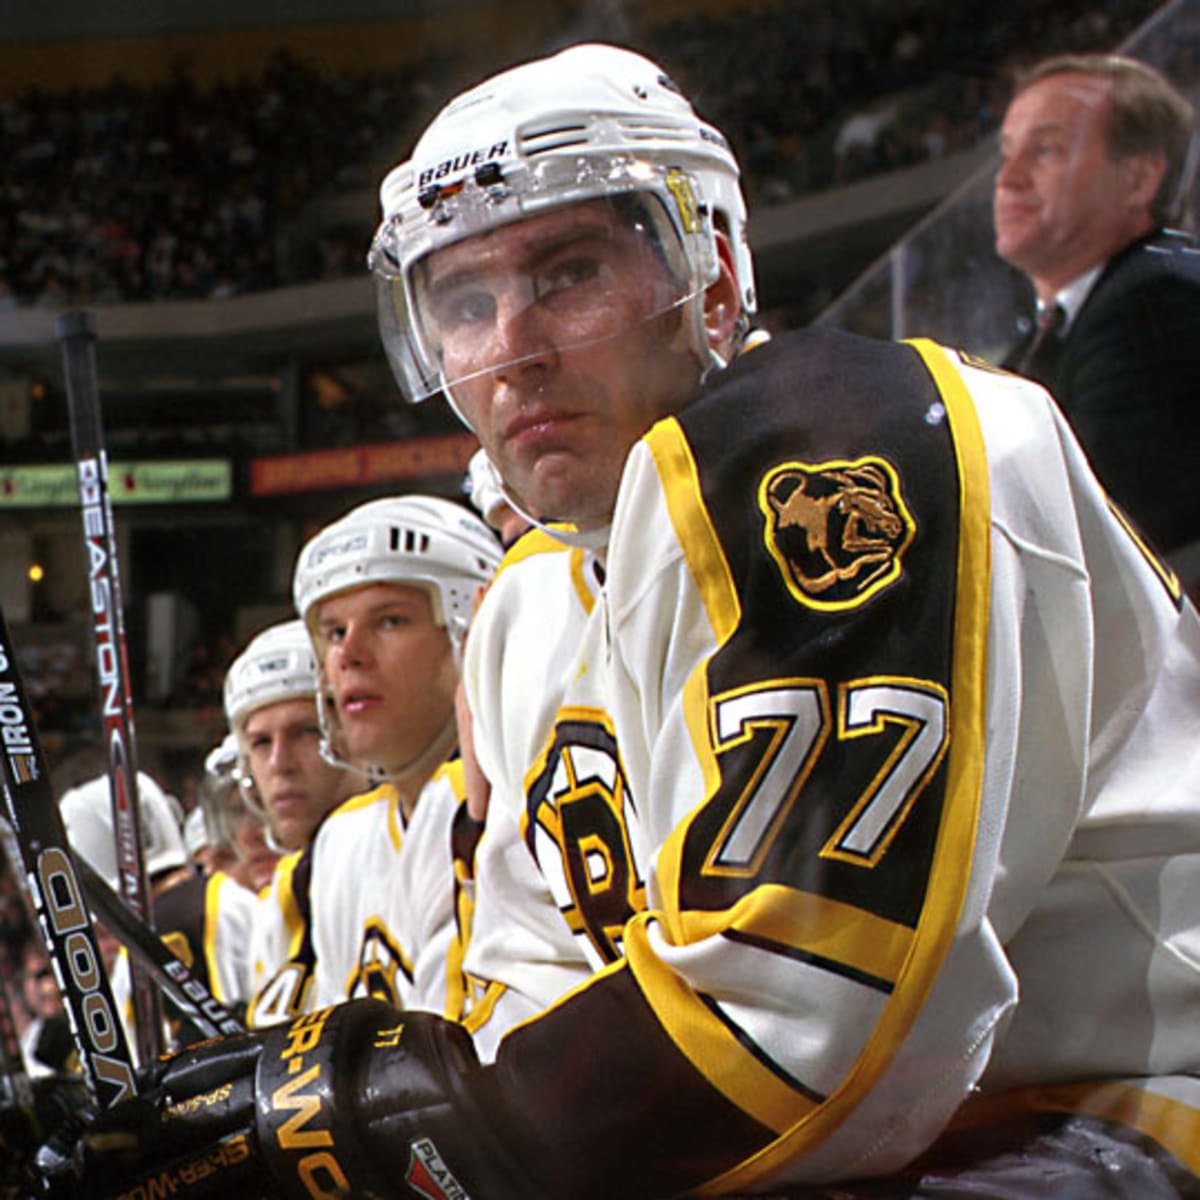 The Avalanche should not have retired Ray Bourque's number